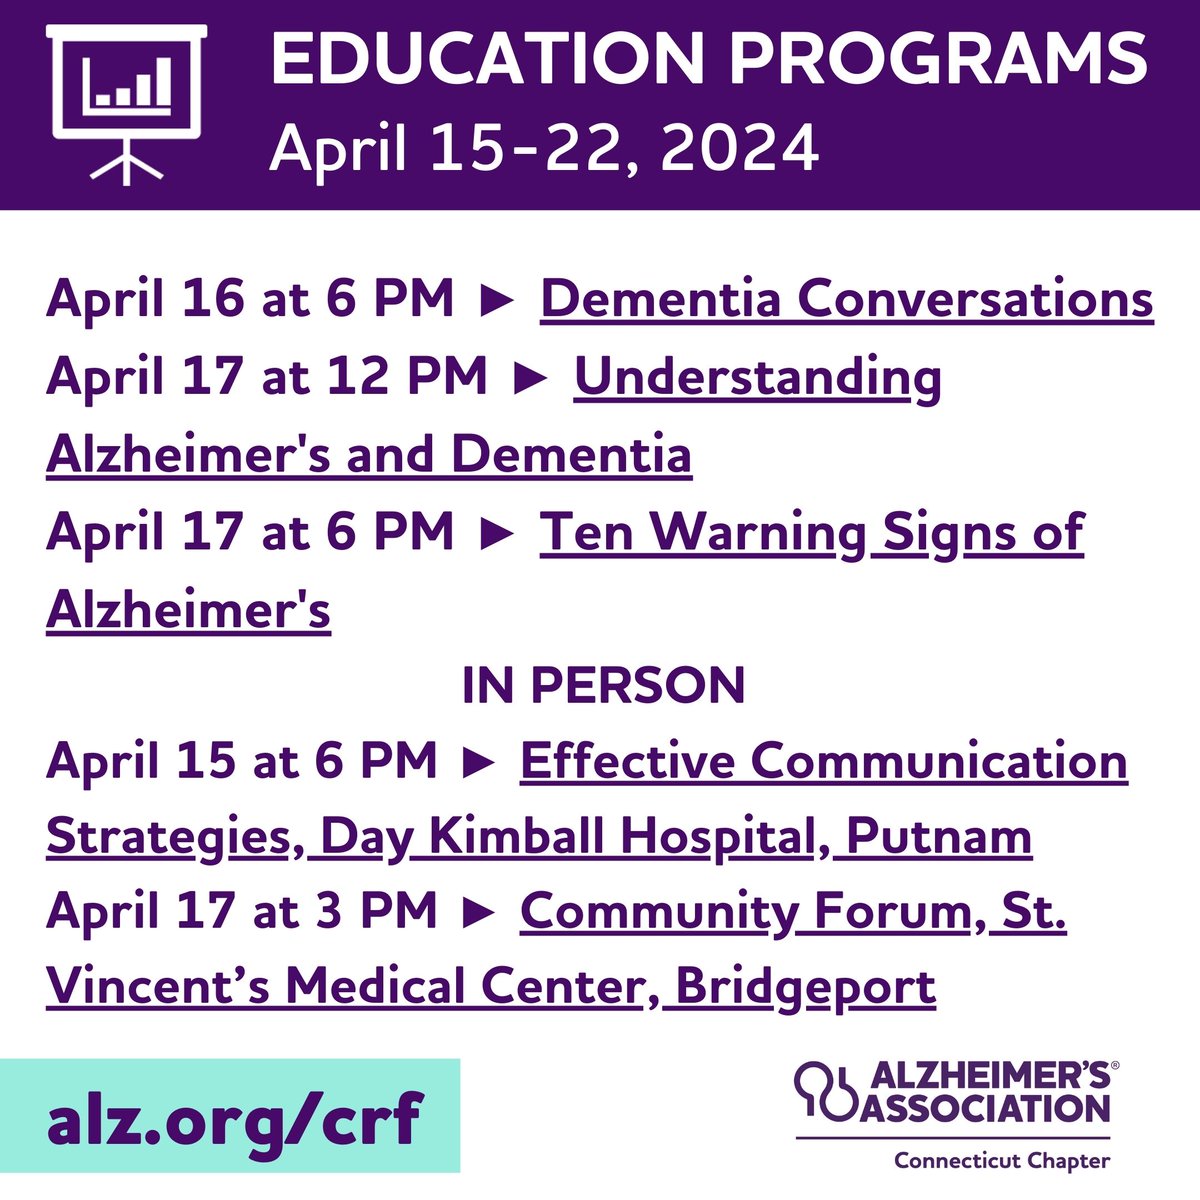 Monday, Monday...time to plan your week. Here are some education programs for you, to expand your knowledge of this disease. You can register at alz.org/crf or by calling our 24/7 Helpline at 1.800.272.3900.